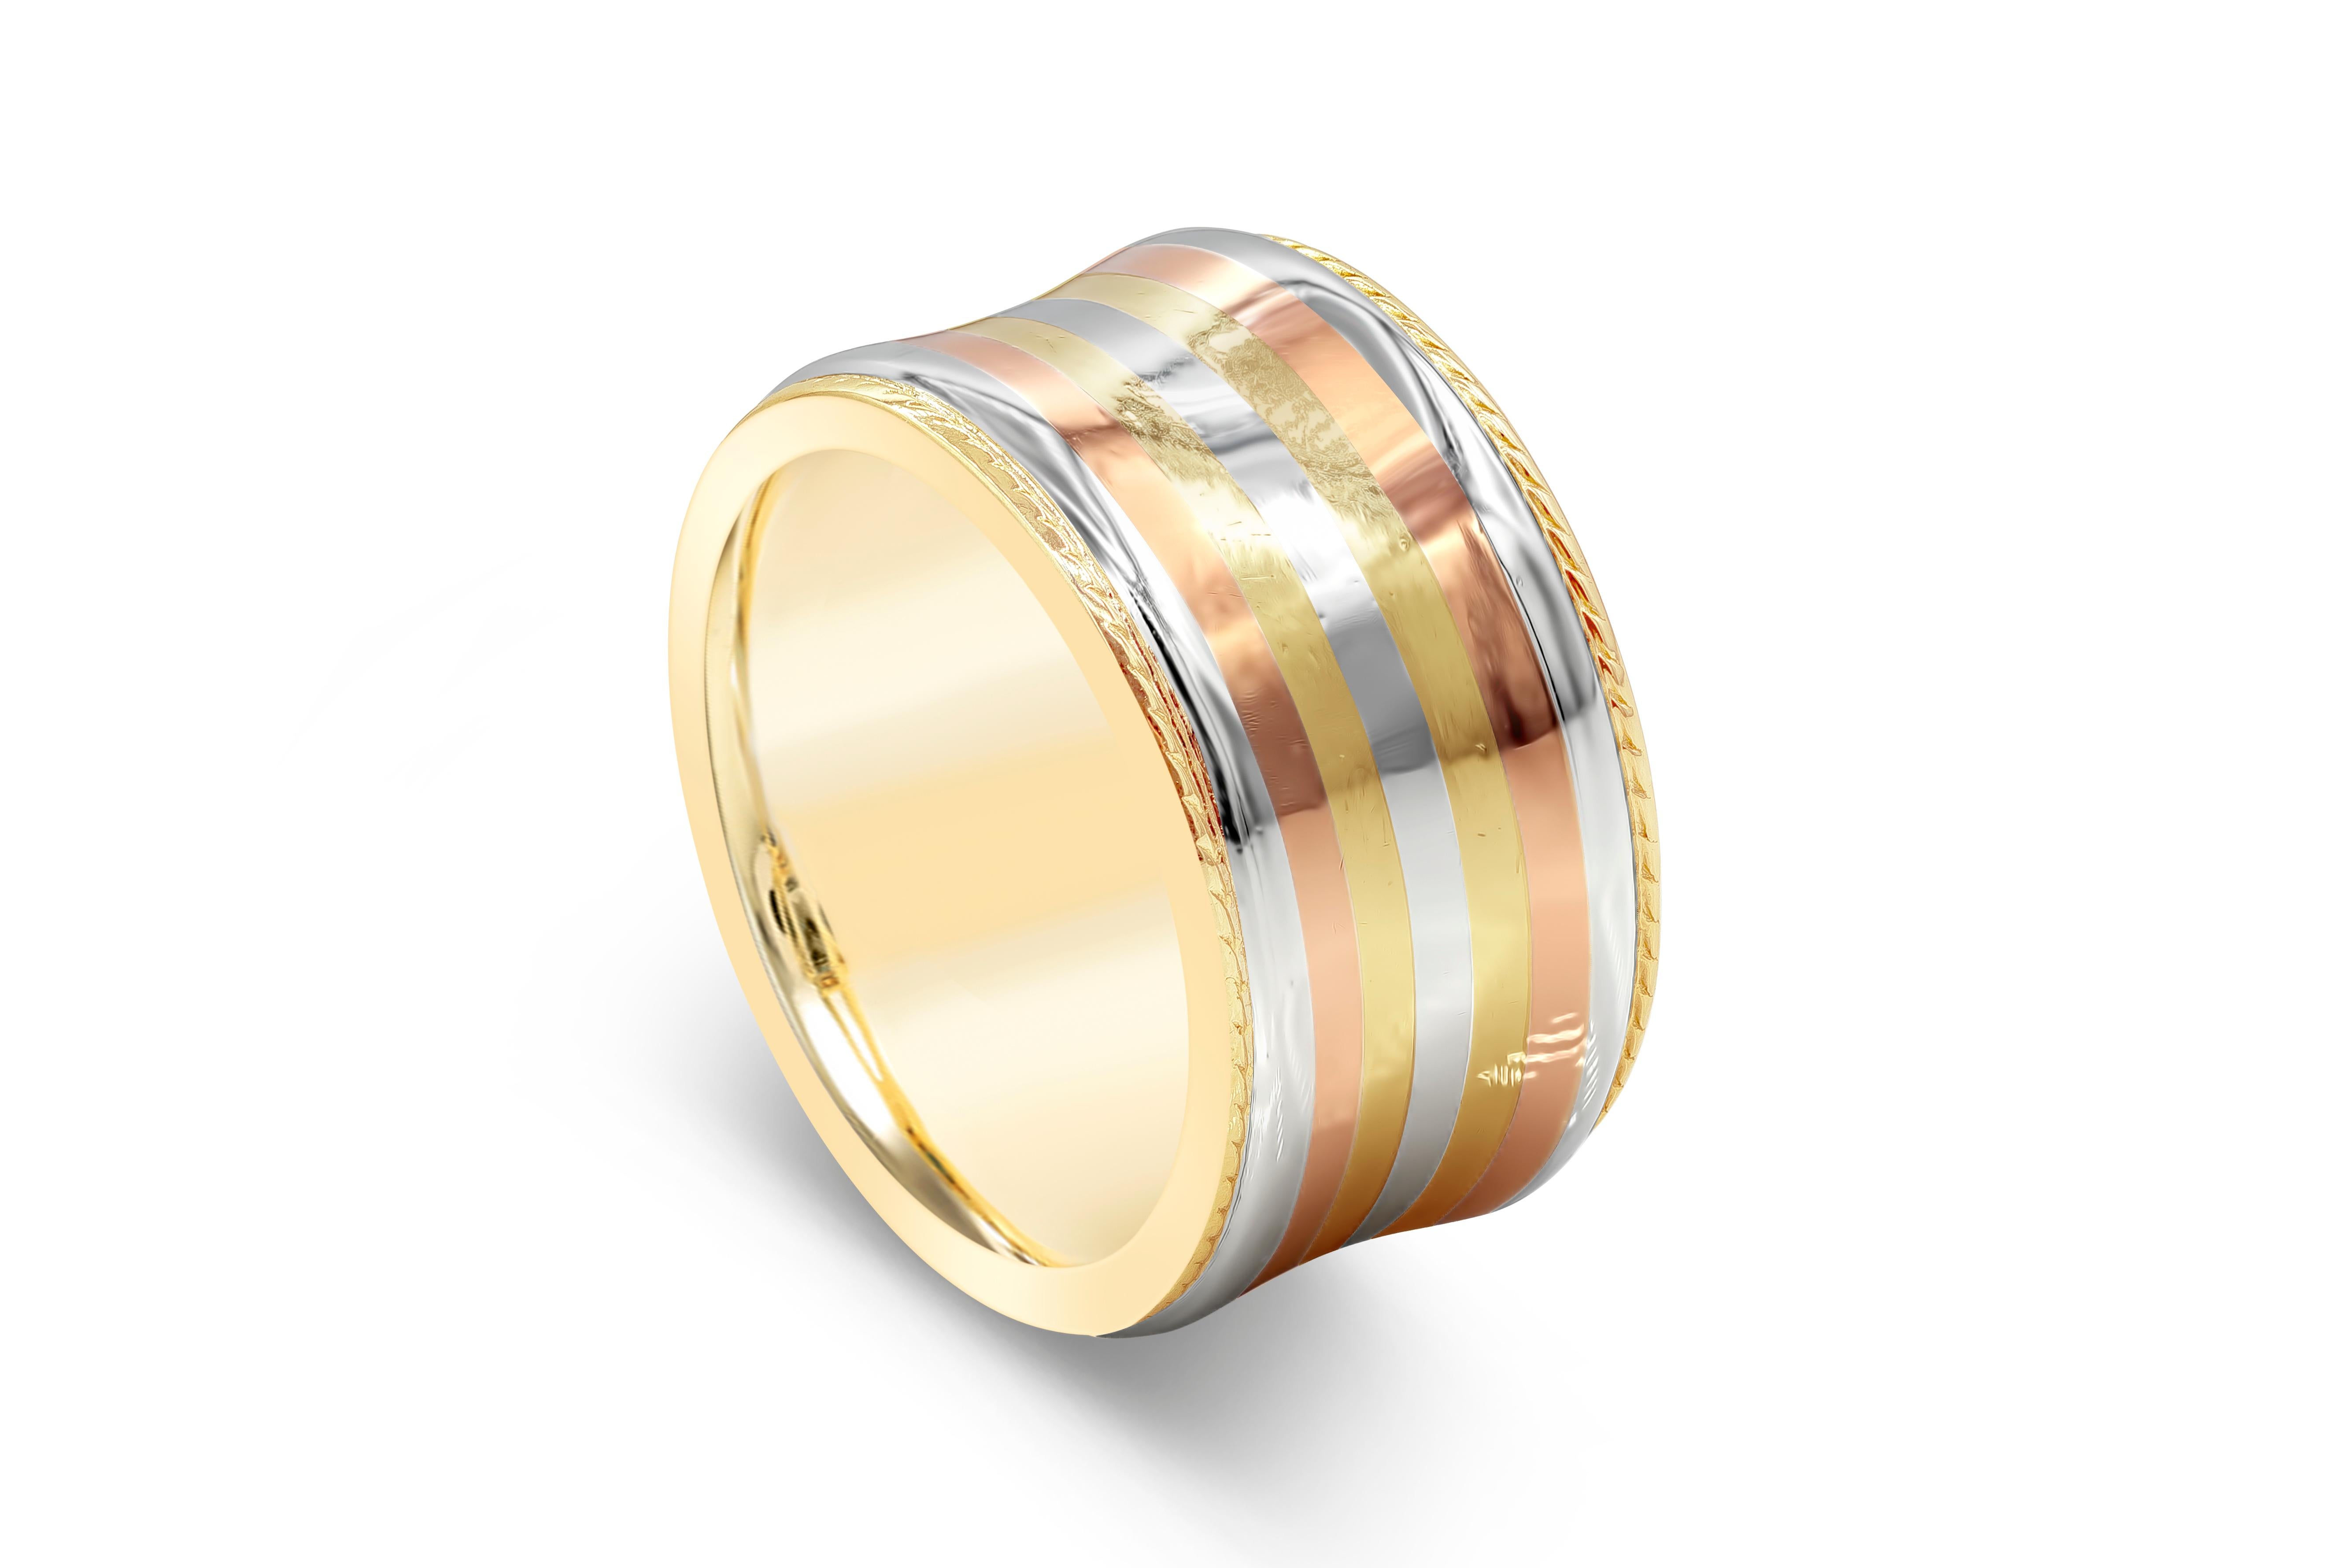 A sleek concave design and wide ring featuring rows of alternating 14k rose, yellow, and white gold. Finished with hand-engraved lines on each side of the ring. 10.25mm wide x 1.90mm wide. Weighs 10.39 grams. Size 5.25 US resizable upon request.

